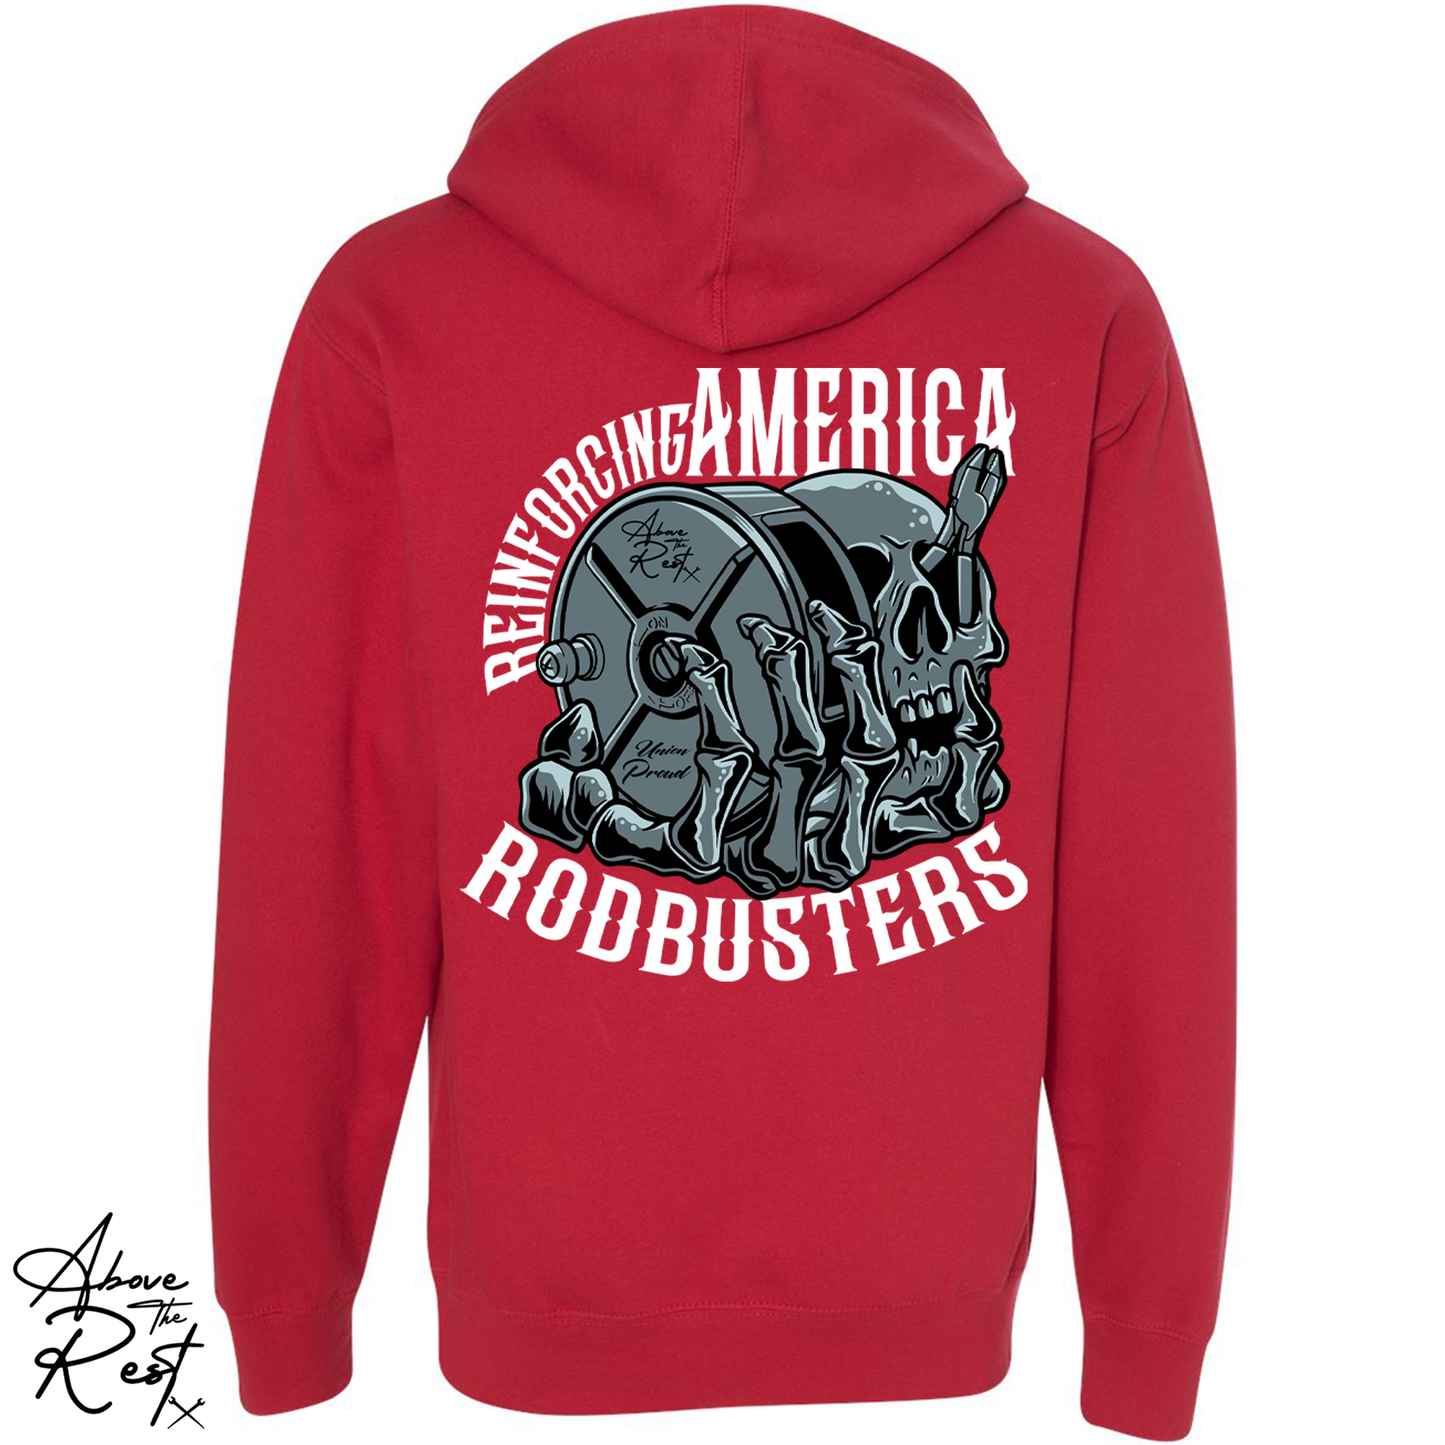 REINFORCING AMERICA RODBUSTERS PULLOVER HOODIE